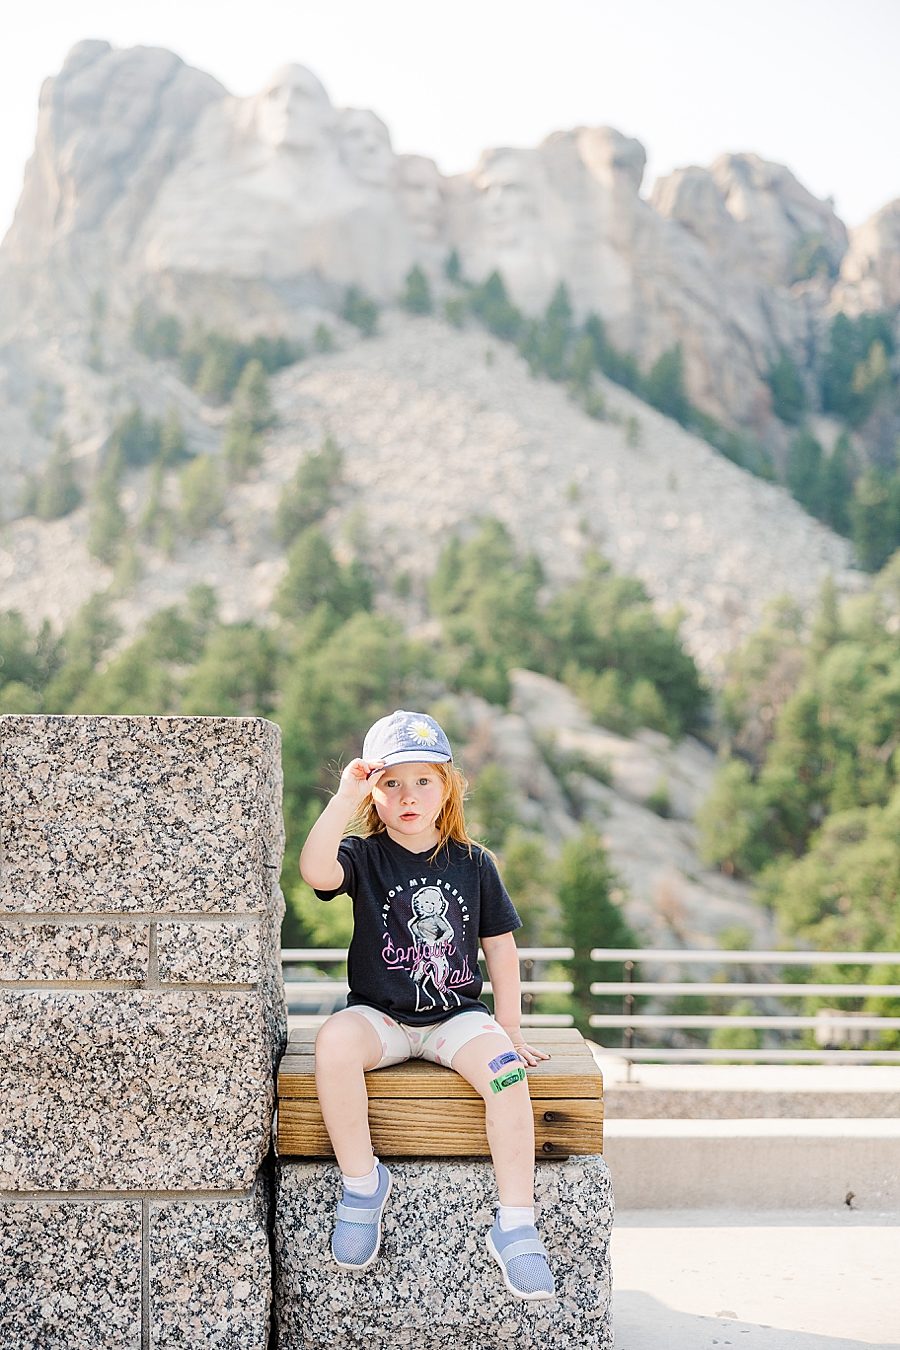 Holding her hat at Mount Rushmore by Knoxville Wedding Photographer, Amanda May Photos.